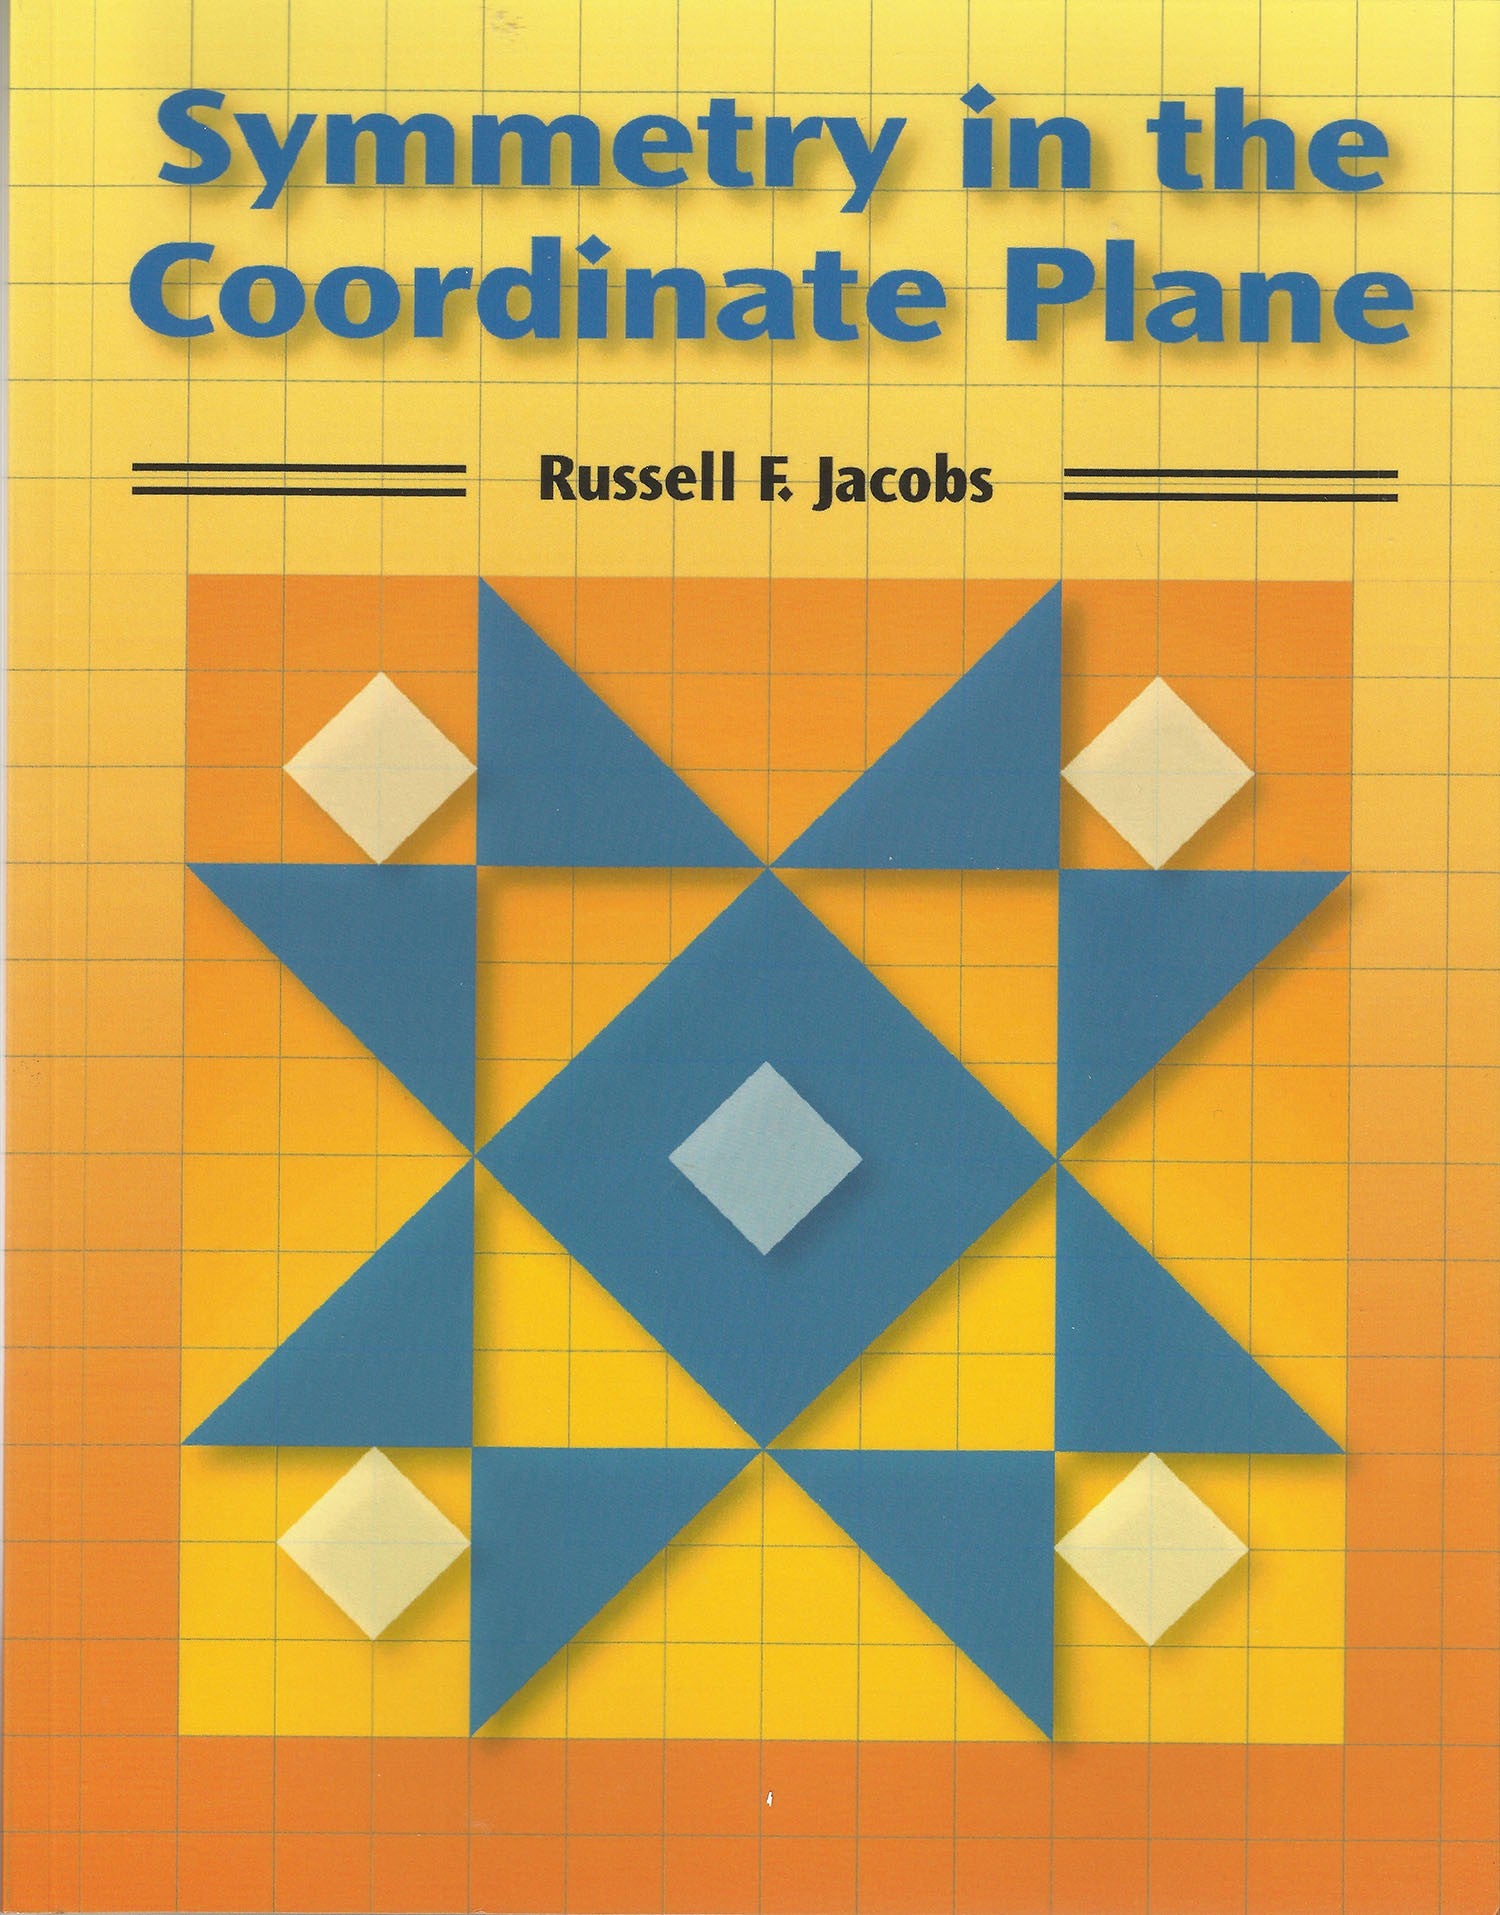 Symmetry in the Coordinate Plane